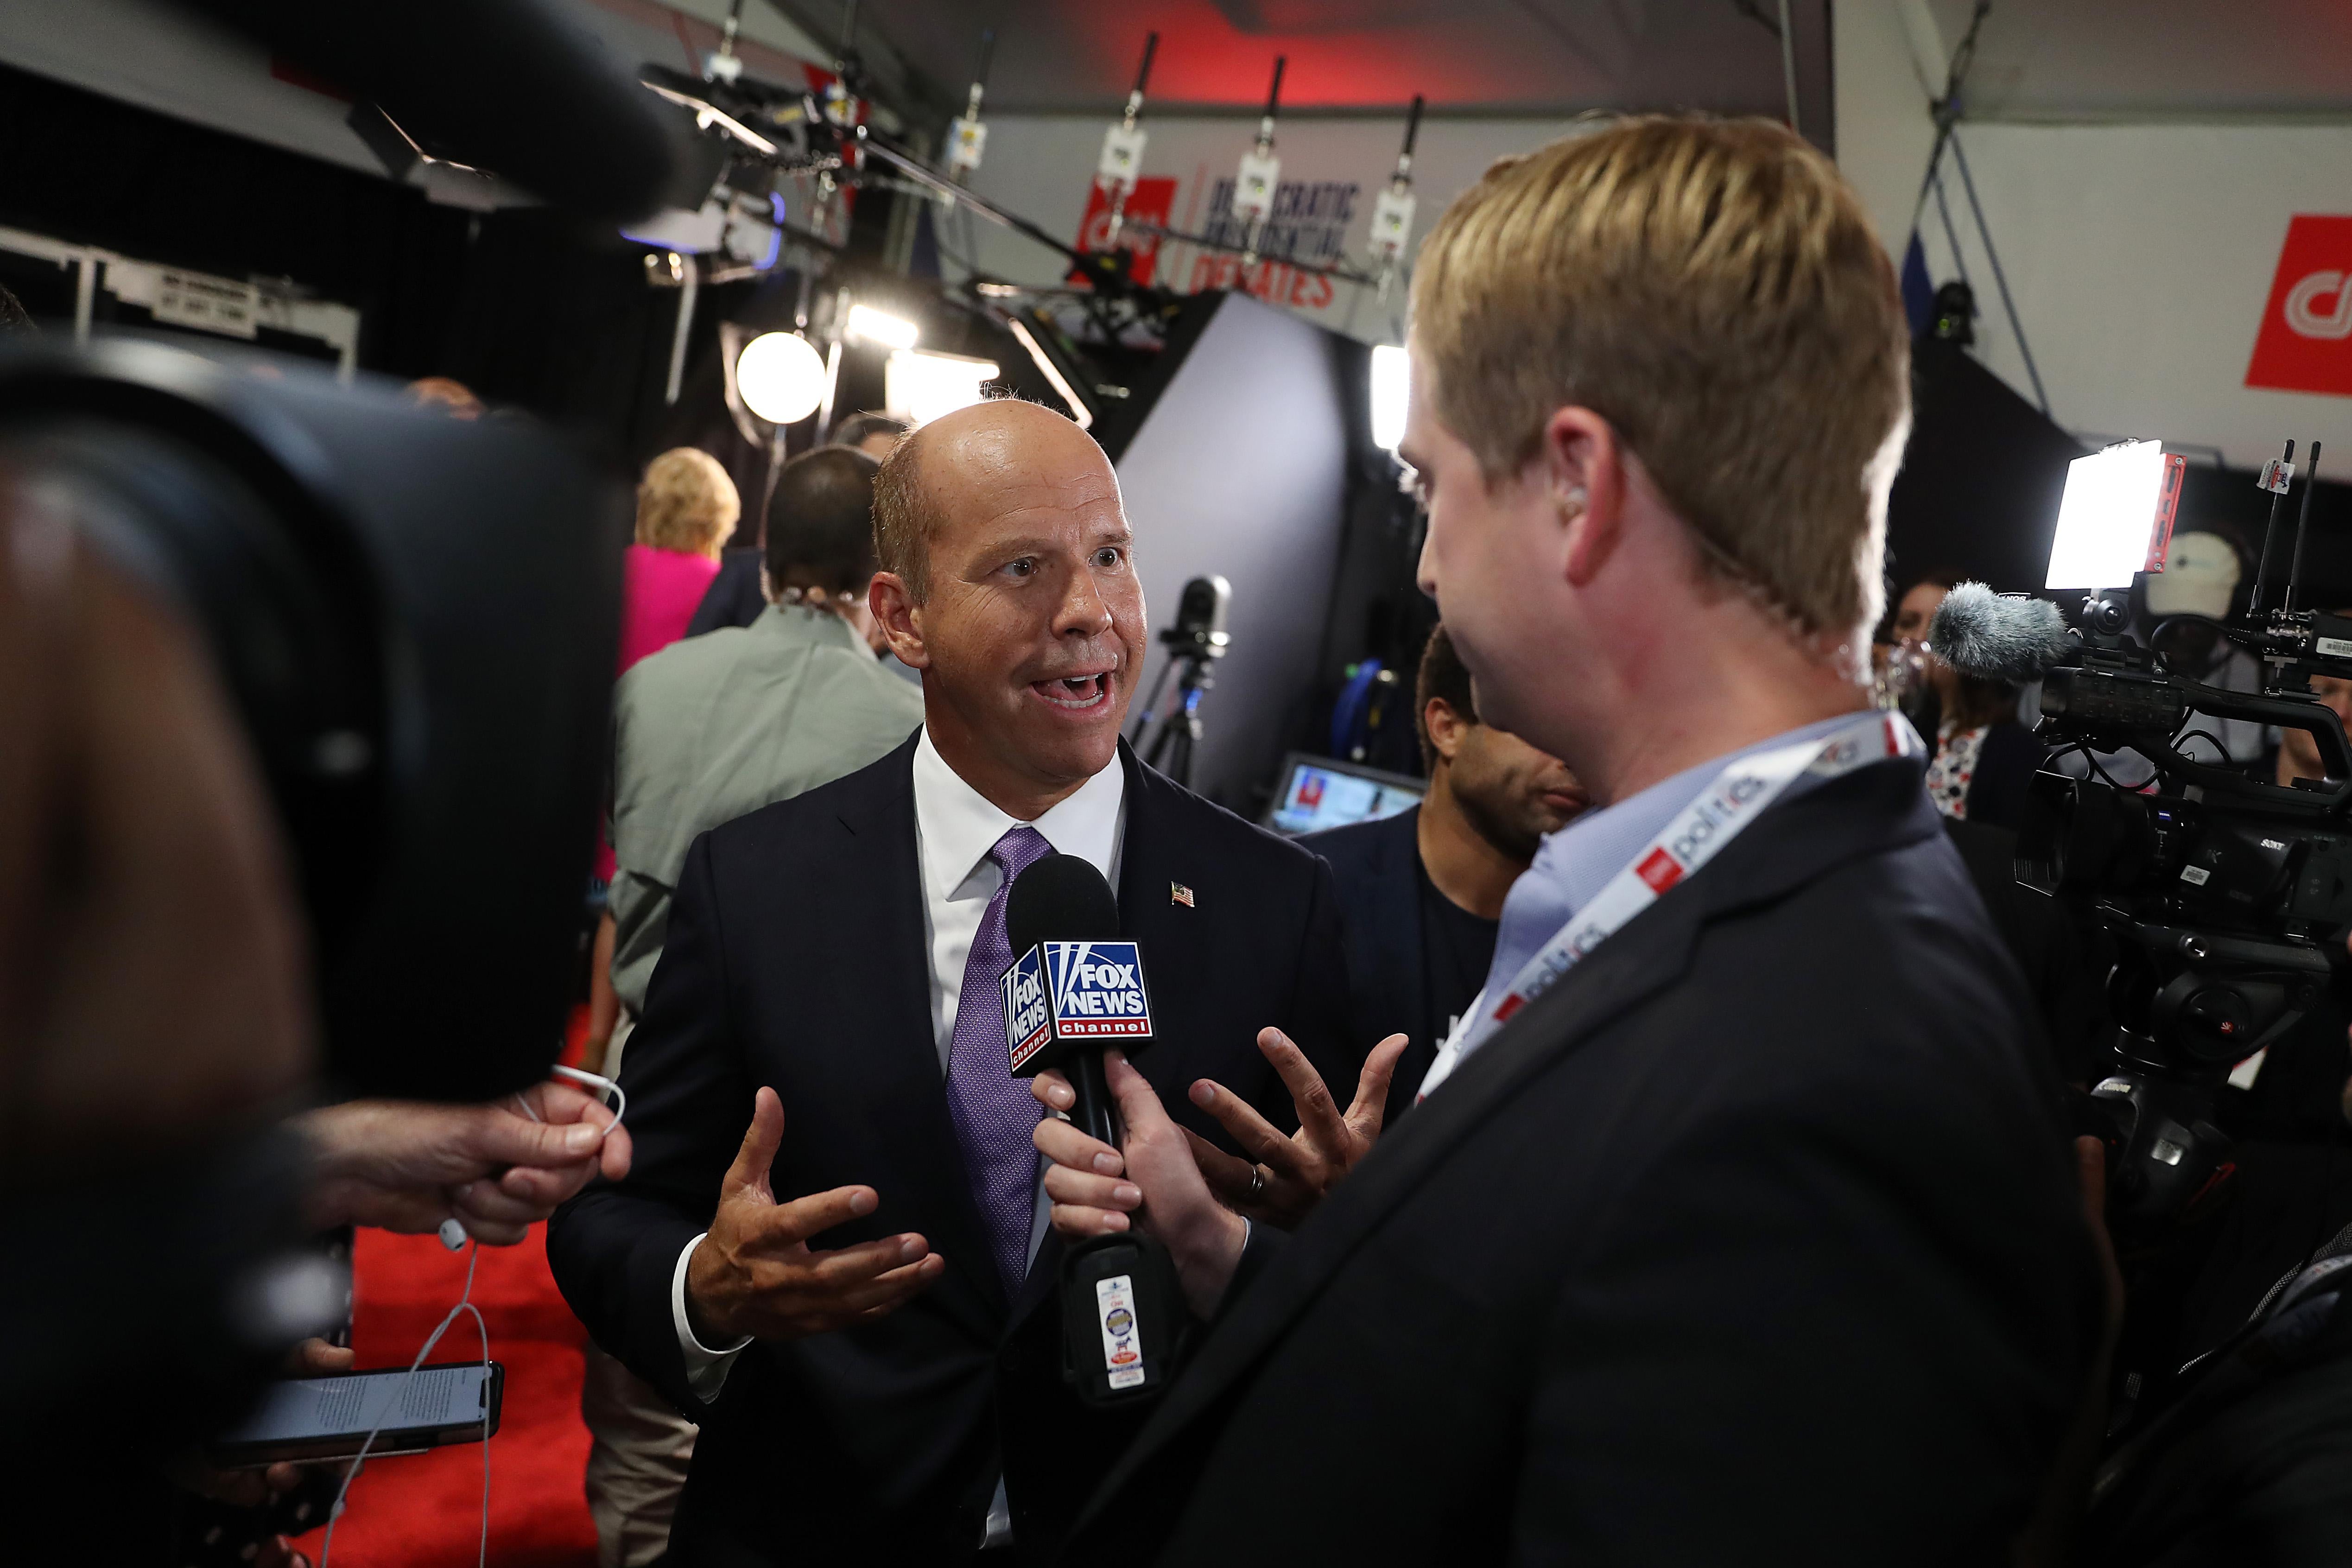 DETROIT, MICHIGAN - JULY 30: Democratic presidential candidate former Maryland congressman John Delaney speaks to the media in the spin room after the Democratic Presidential Debate at the Fox Theatre July 30, 2019 in Detroit, Michigan. 20 Democratic presidential candidates were split into two groups of 10 to take part in the debate sponsored by CNN held over two nights at Detroit’s Fox Theatre.  (Photo by Justin Sullivan/Getty Images)